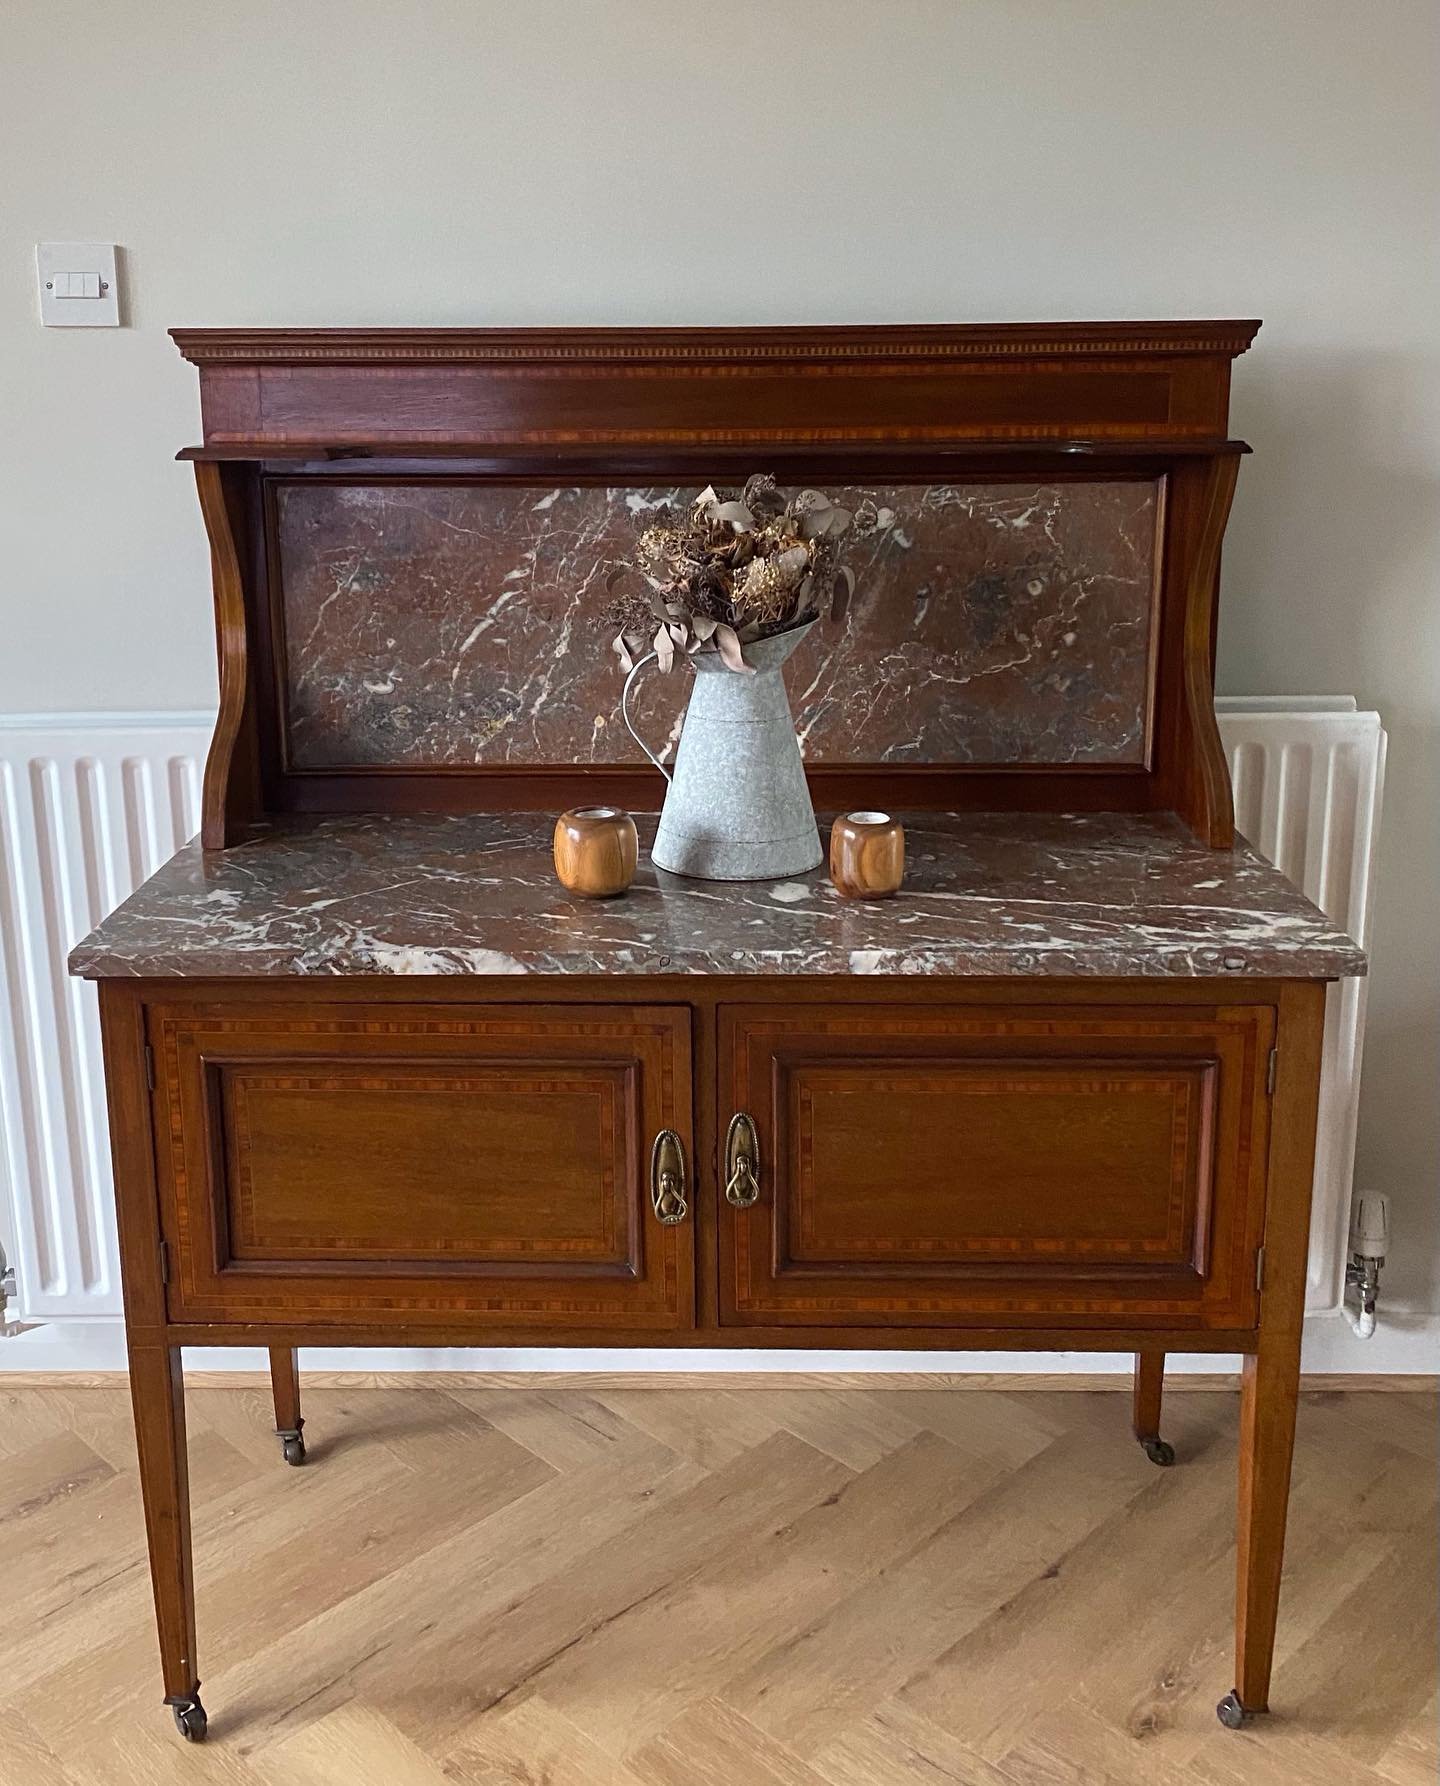 New in my shop today, this Edwardian inlaid mahogany wash stand with red marble top and splash back. A lovely antique piece in great condition. 

#antiqueshop #antiquefurniture #antiquedesign #antiqueinteriors #redmarble #washstand #edwardianstyle #e